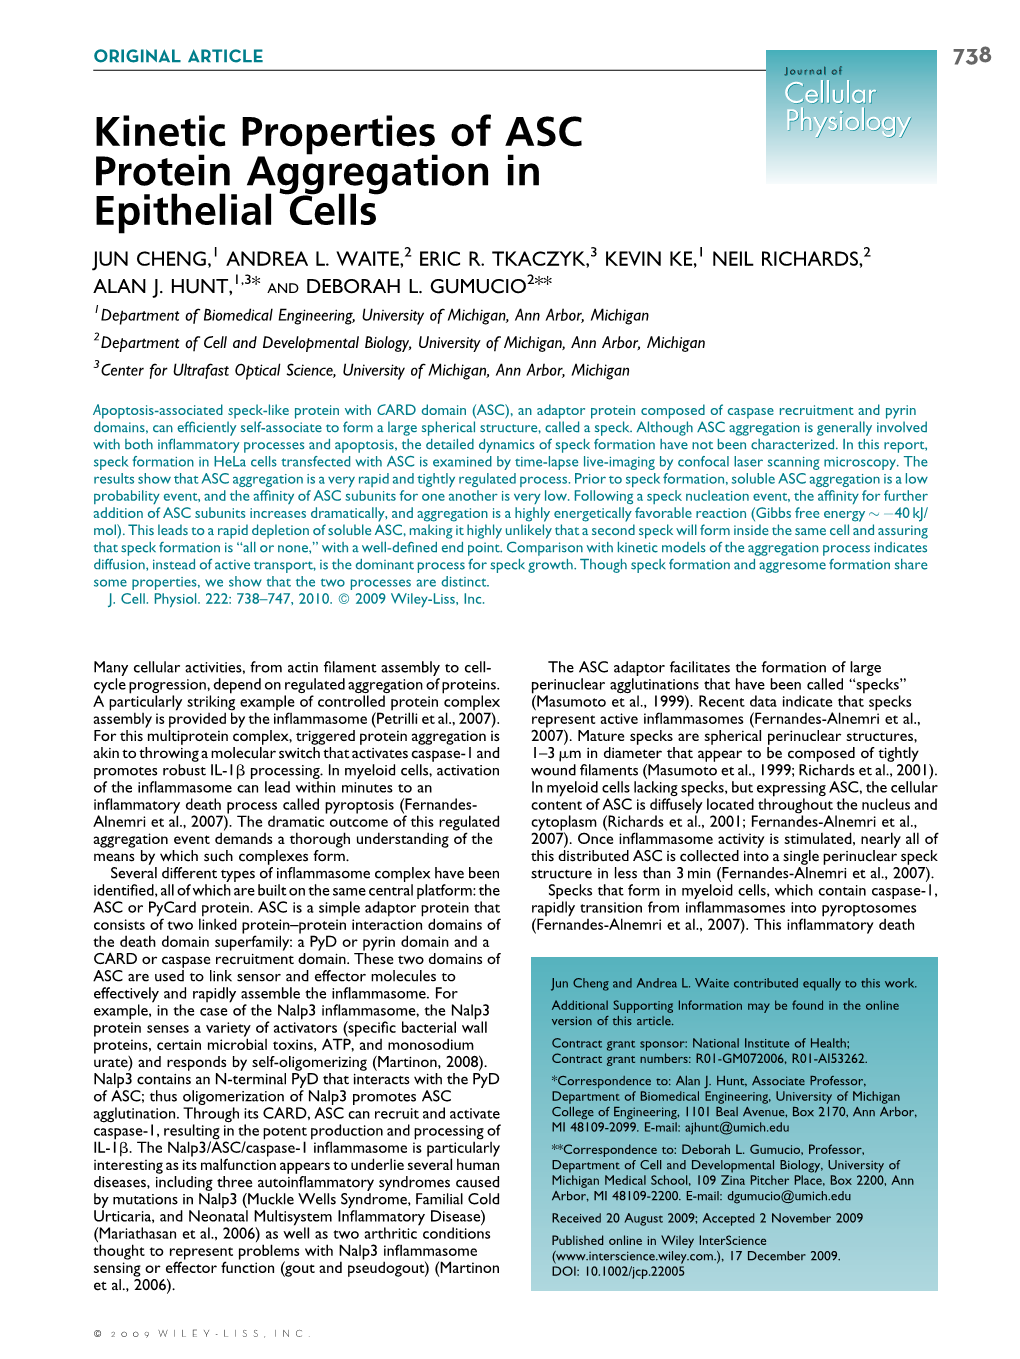 Kinetic Properties of ASC Protein Aggregation in Epithelial Cells